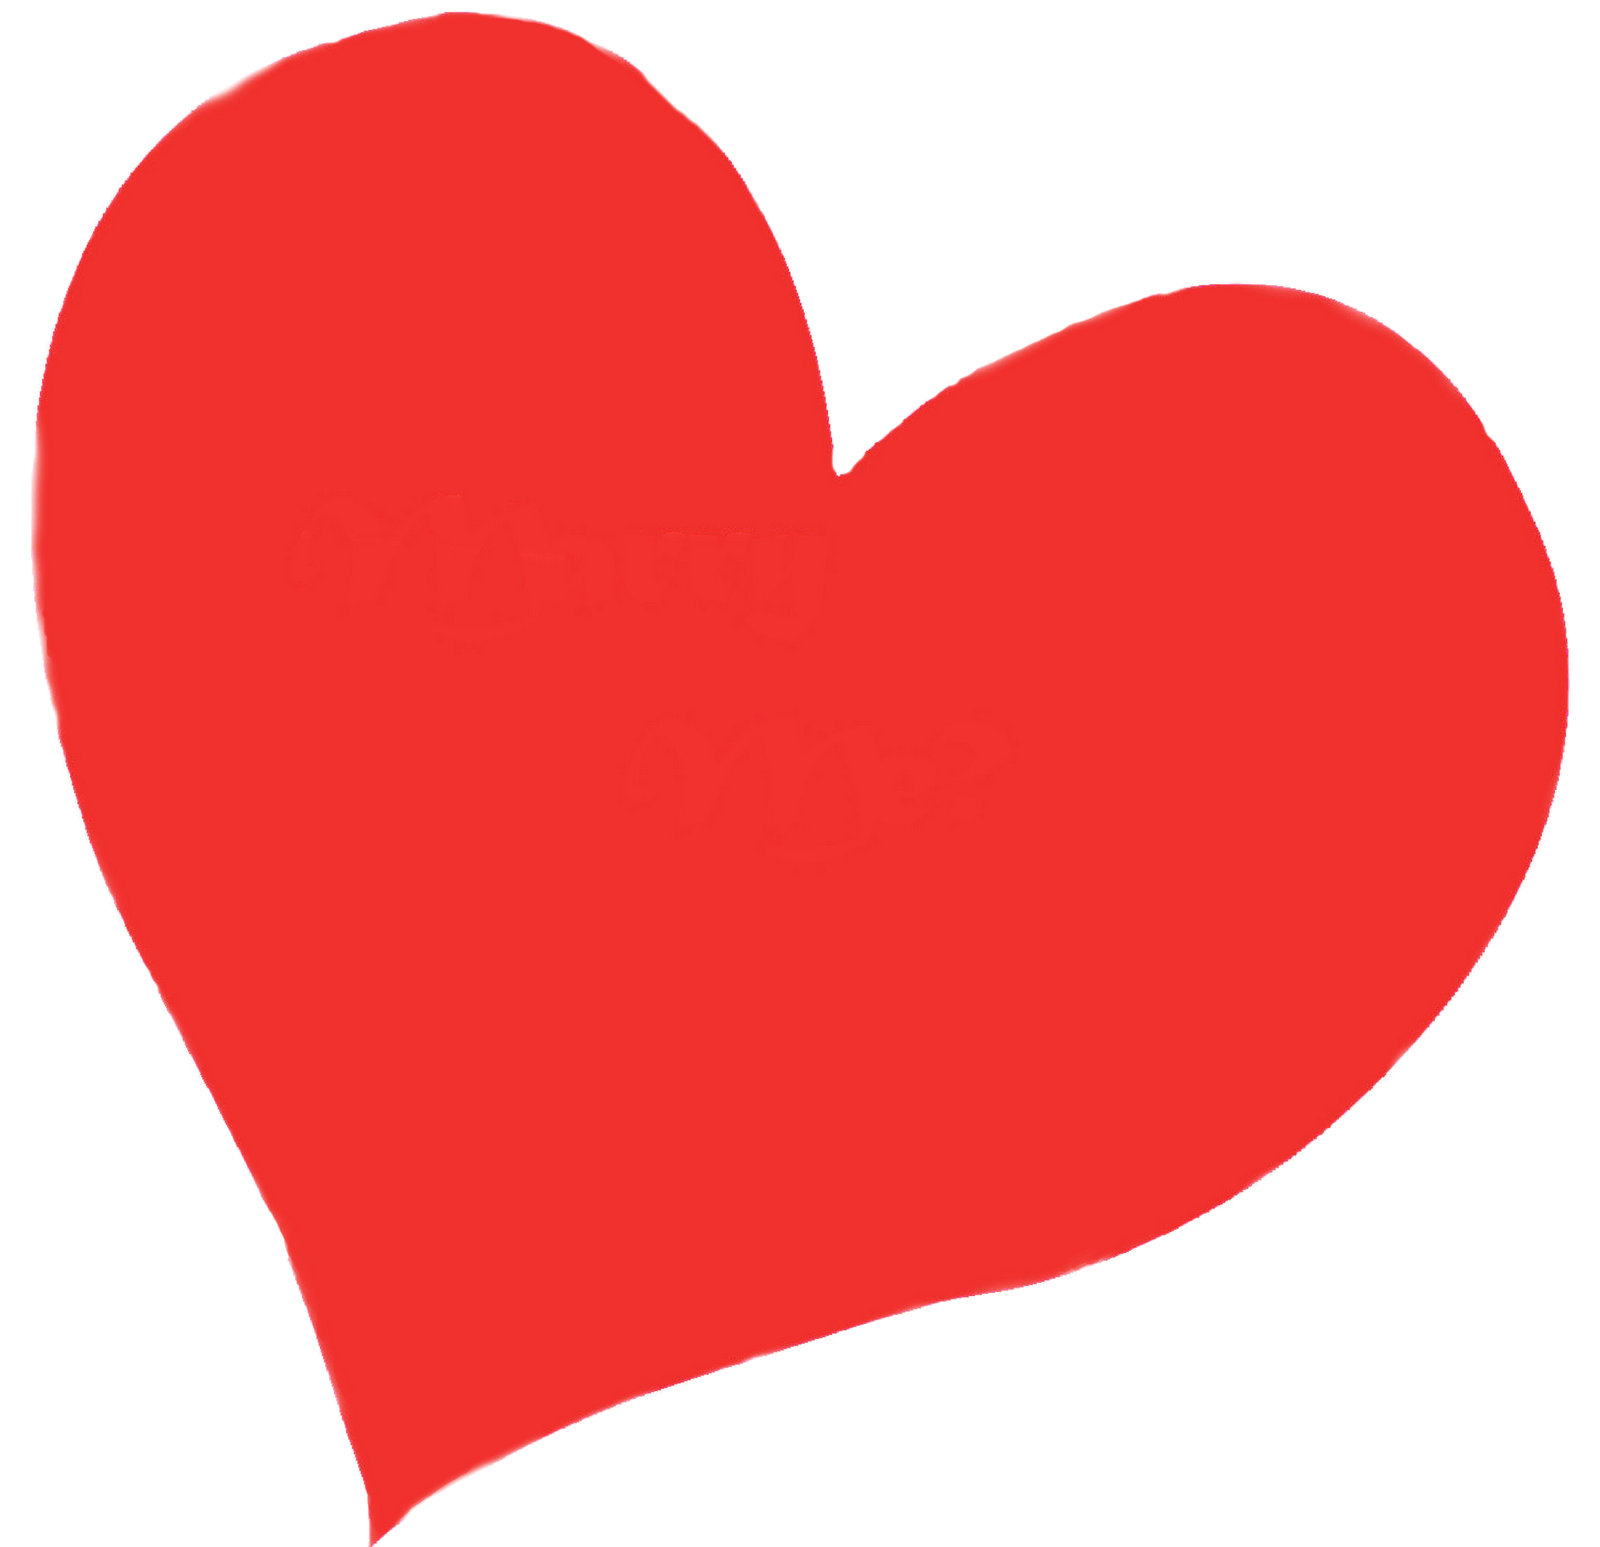 Hand drawn heart clipart no background